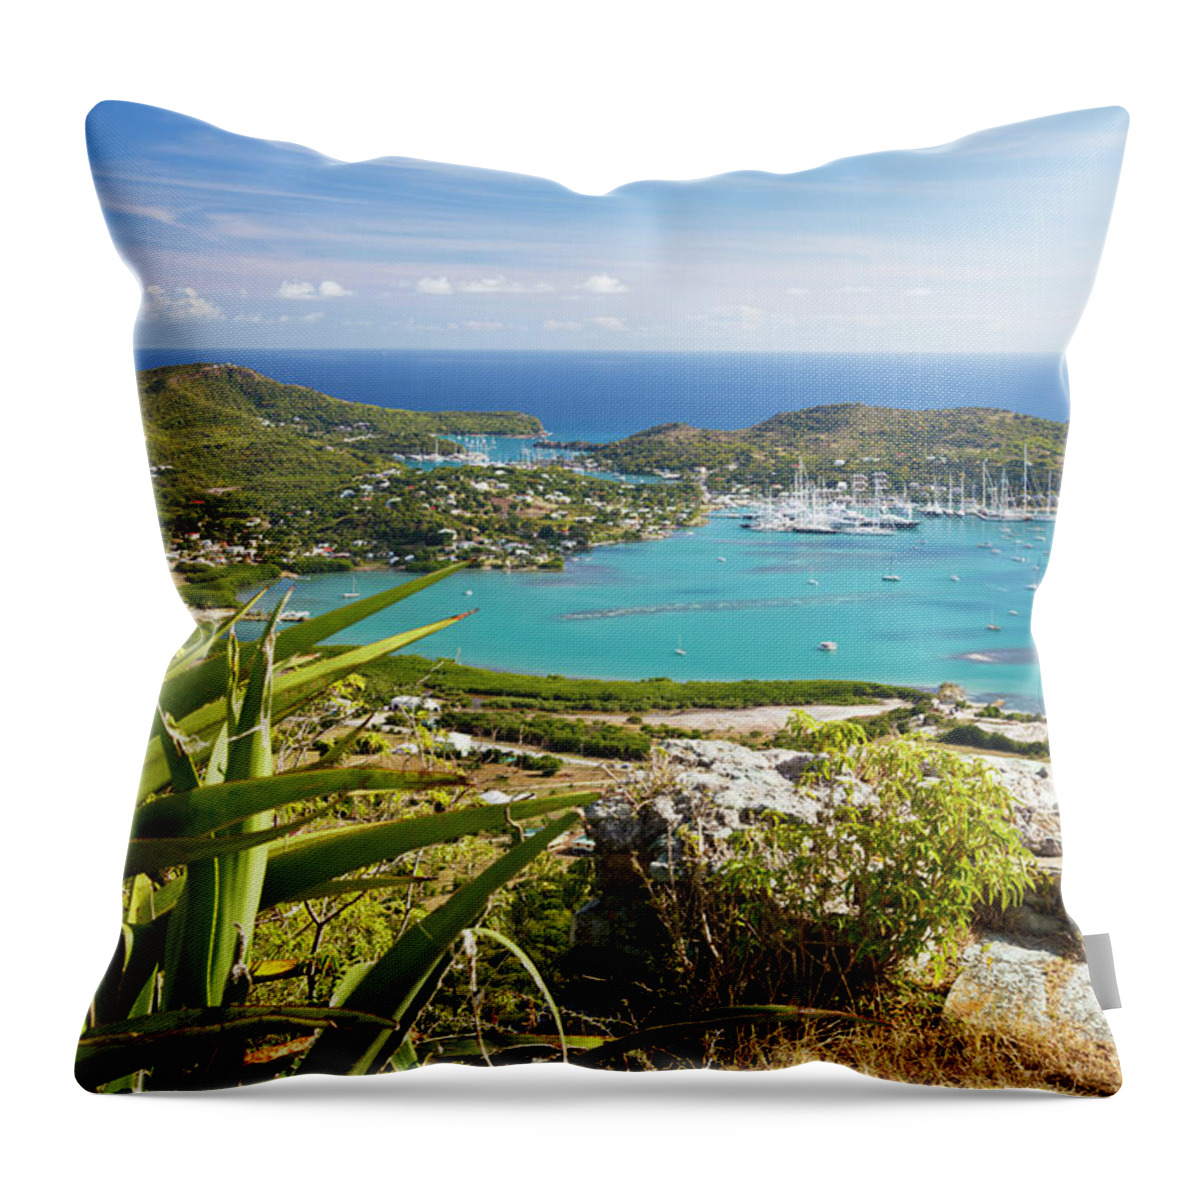 Scenics Throw Pillow featuring the photograph Falmouth And English Harbor, Antigua by Michaelutech